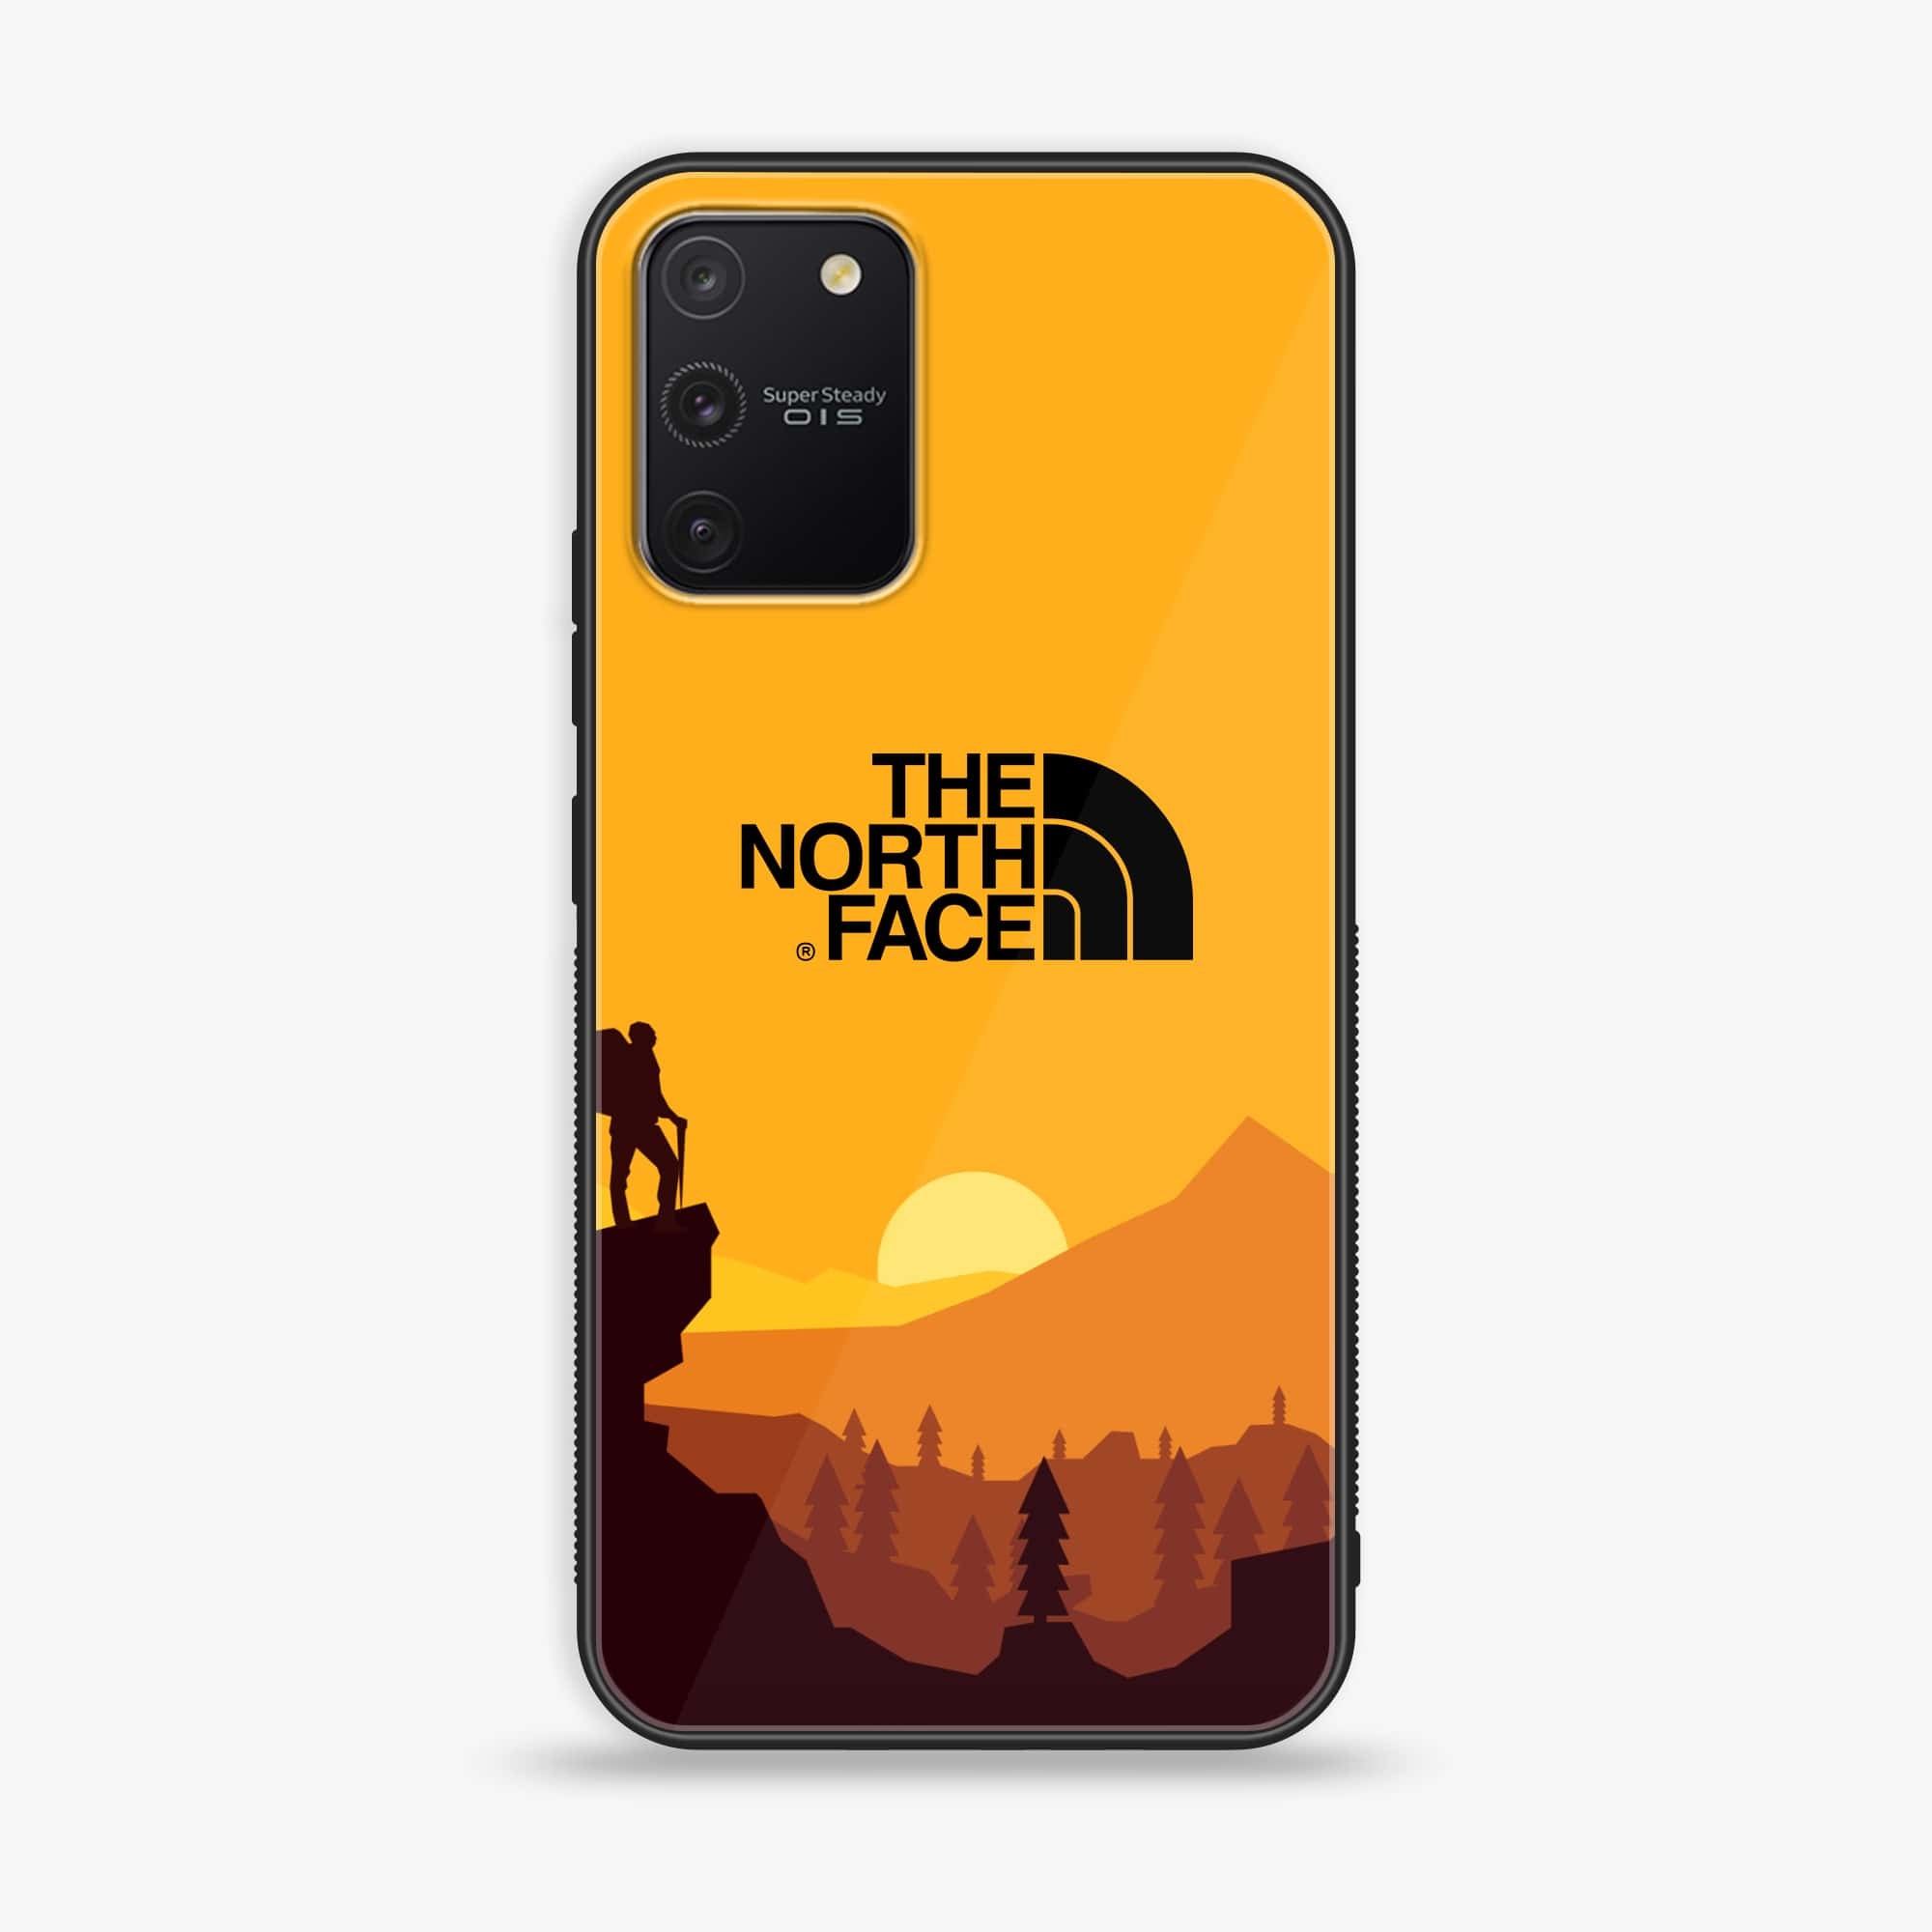 Galaxy S10 Lite - The North Face Series - Premium Printed Glass soft Bumper shock Proof Case